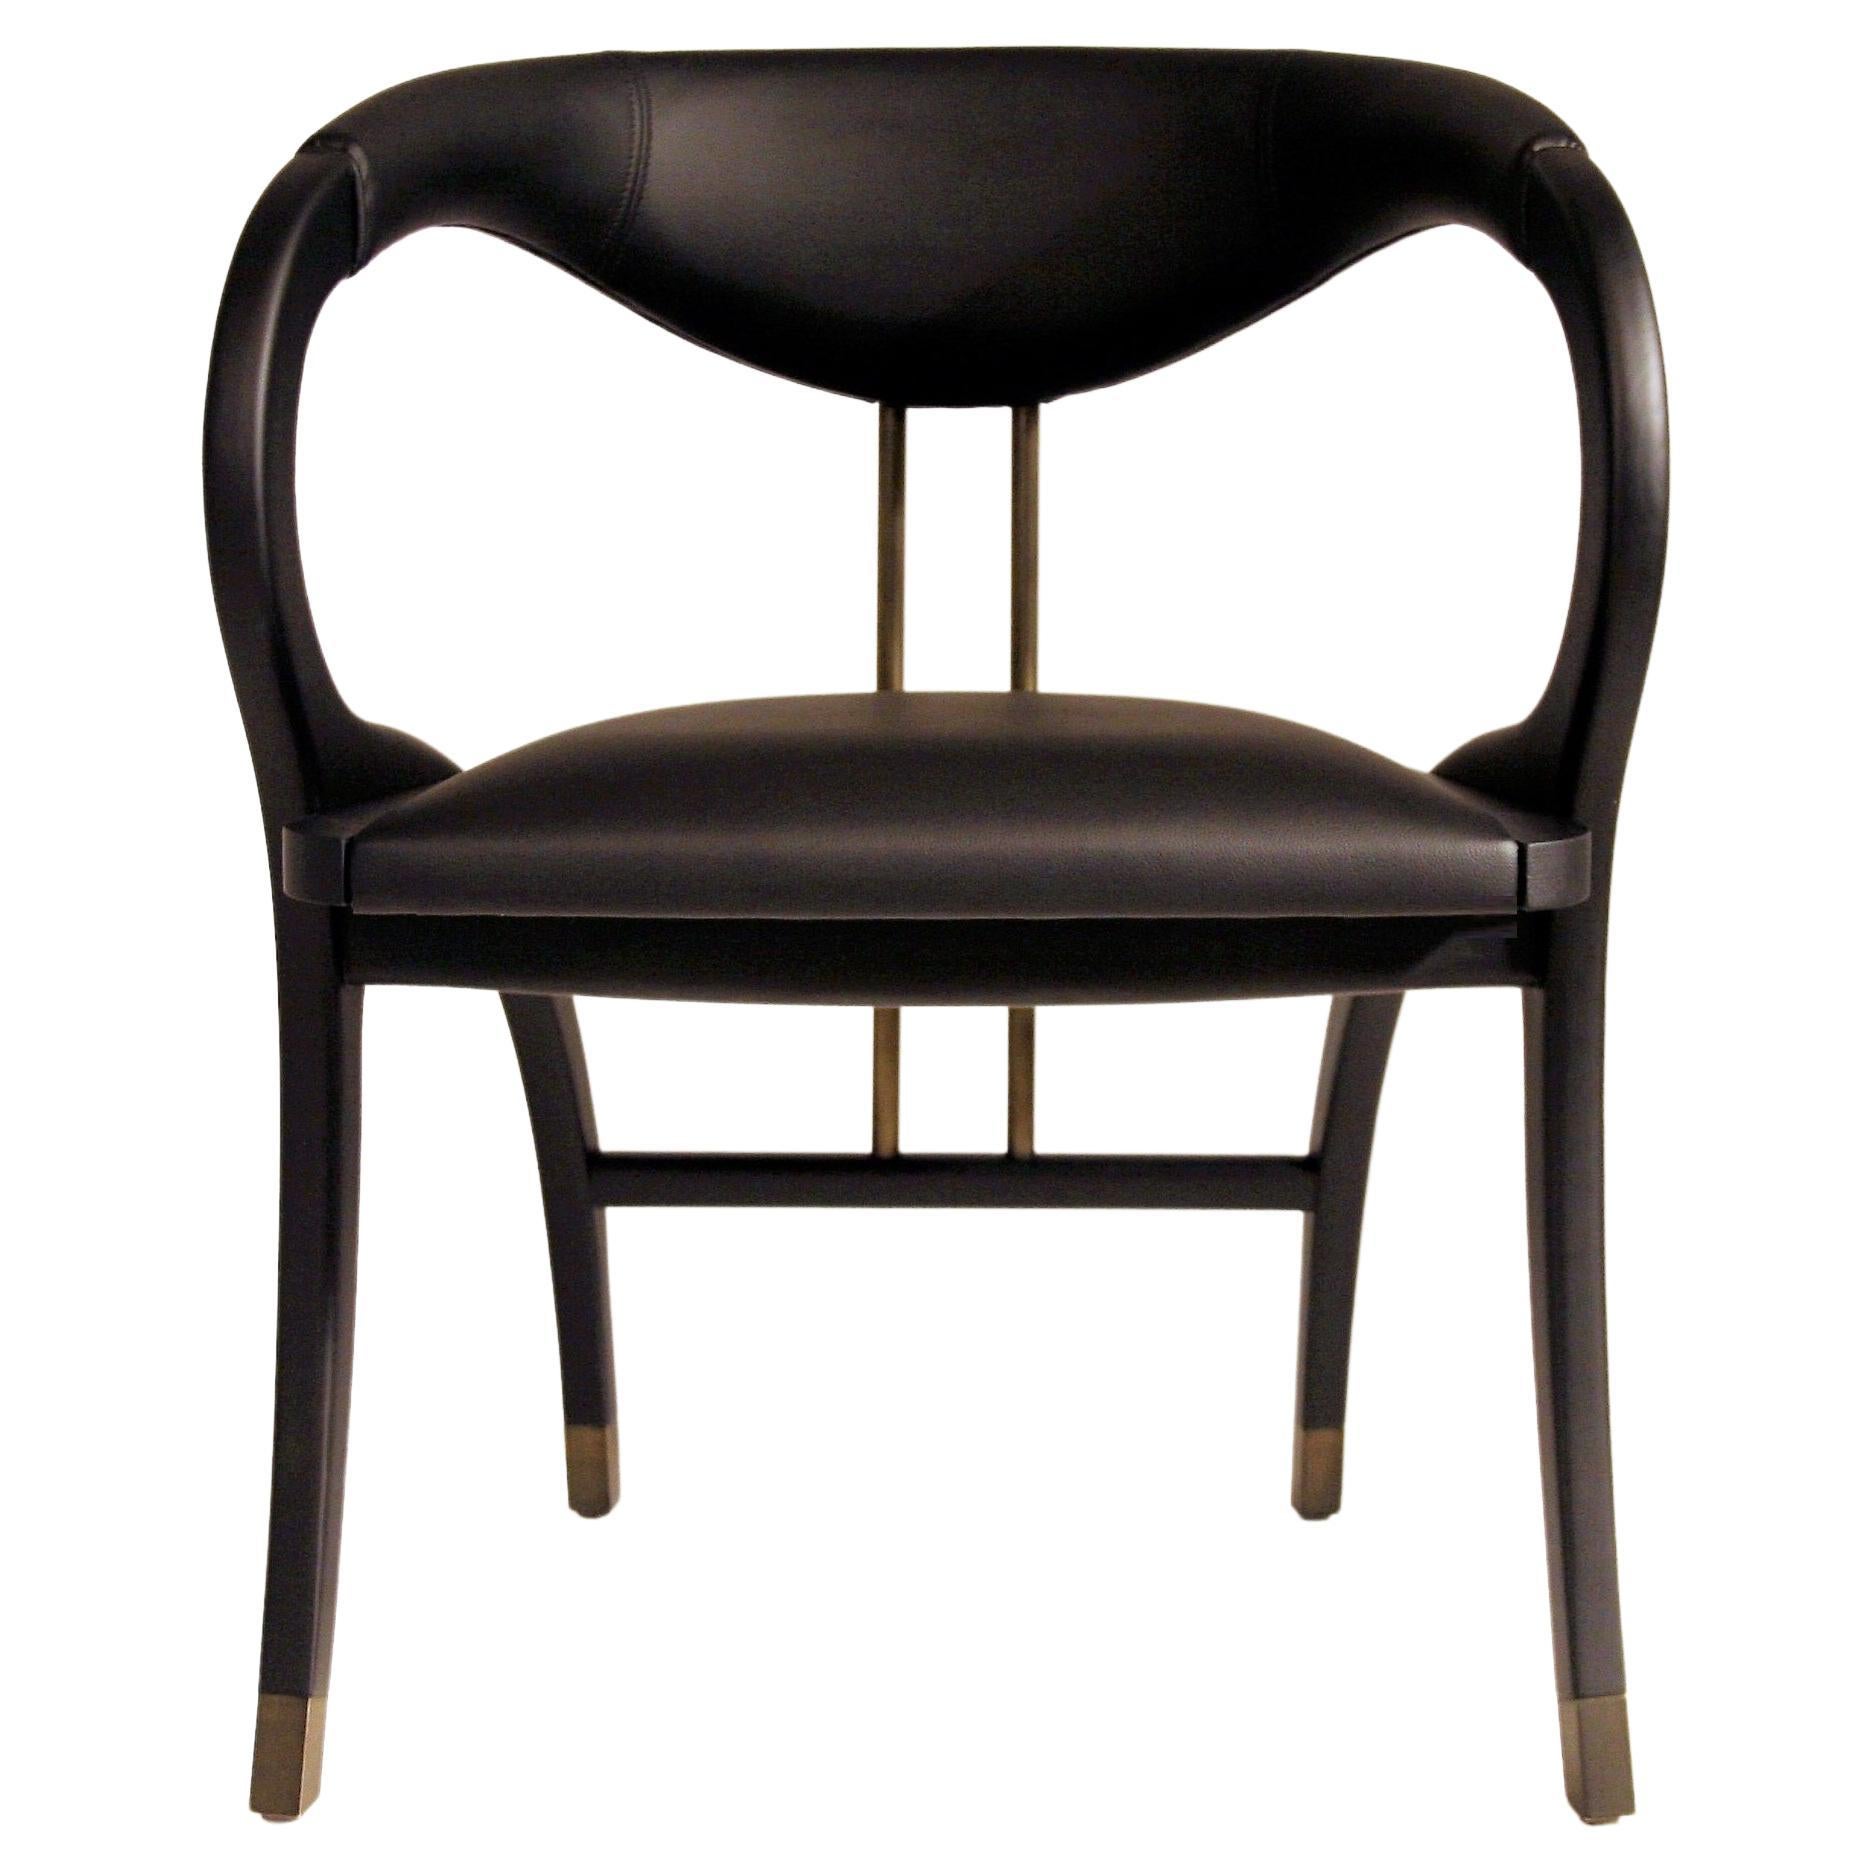 The Cobra chair features extraordinary design with curved back legs that form part of the armrests and back support in a continuous silhouette.
Handcrafted of solid oak in ebony finish and bronzed metal.
Upholstered seat and backrest in genuine